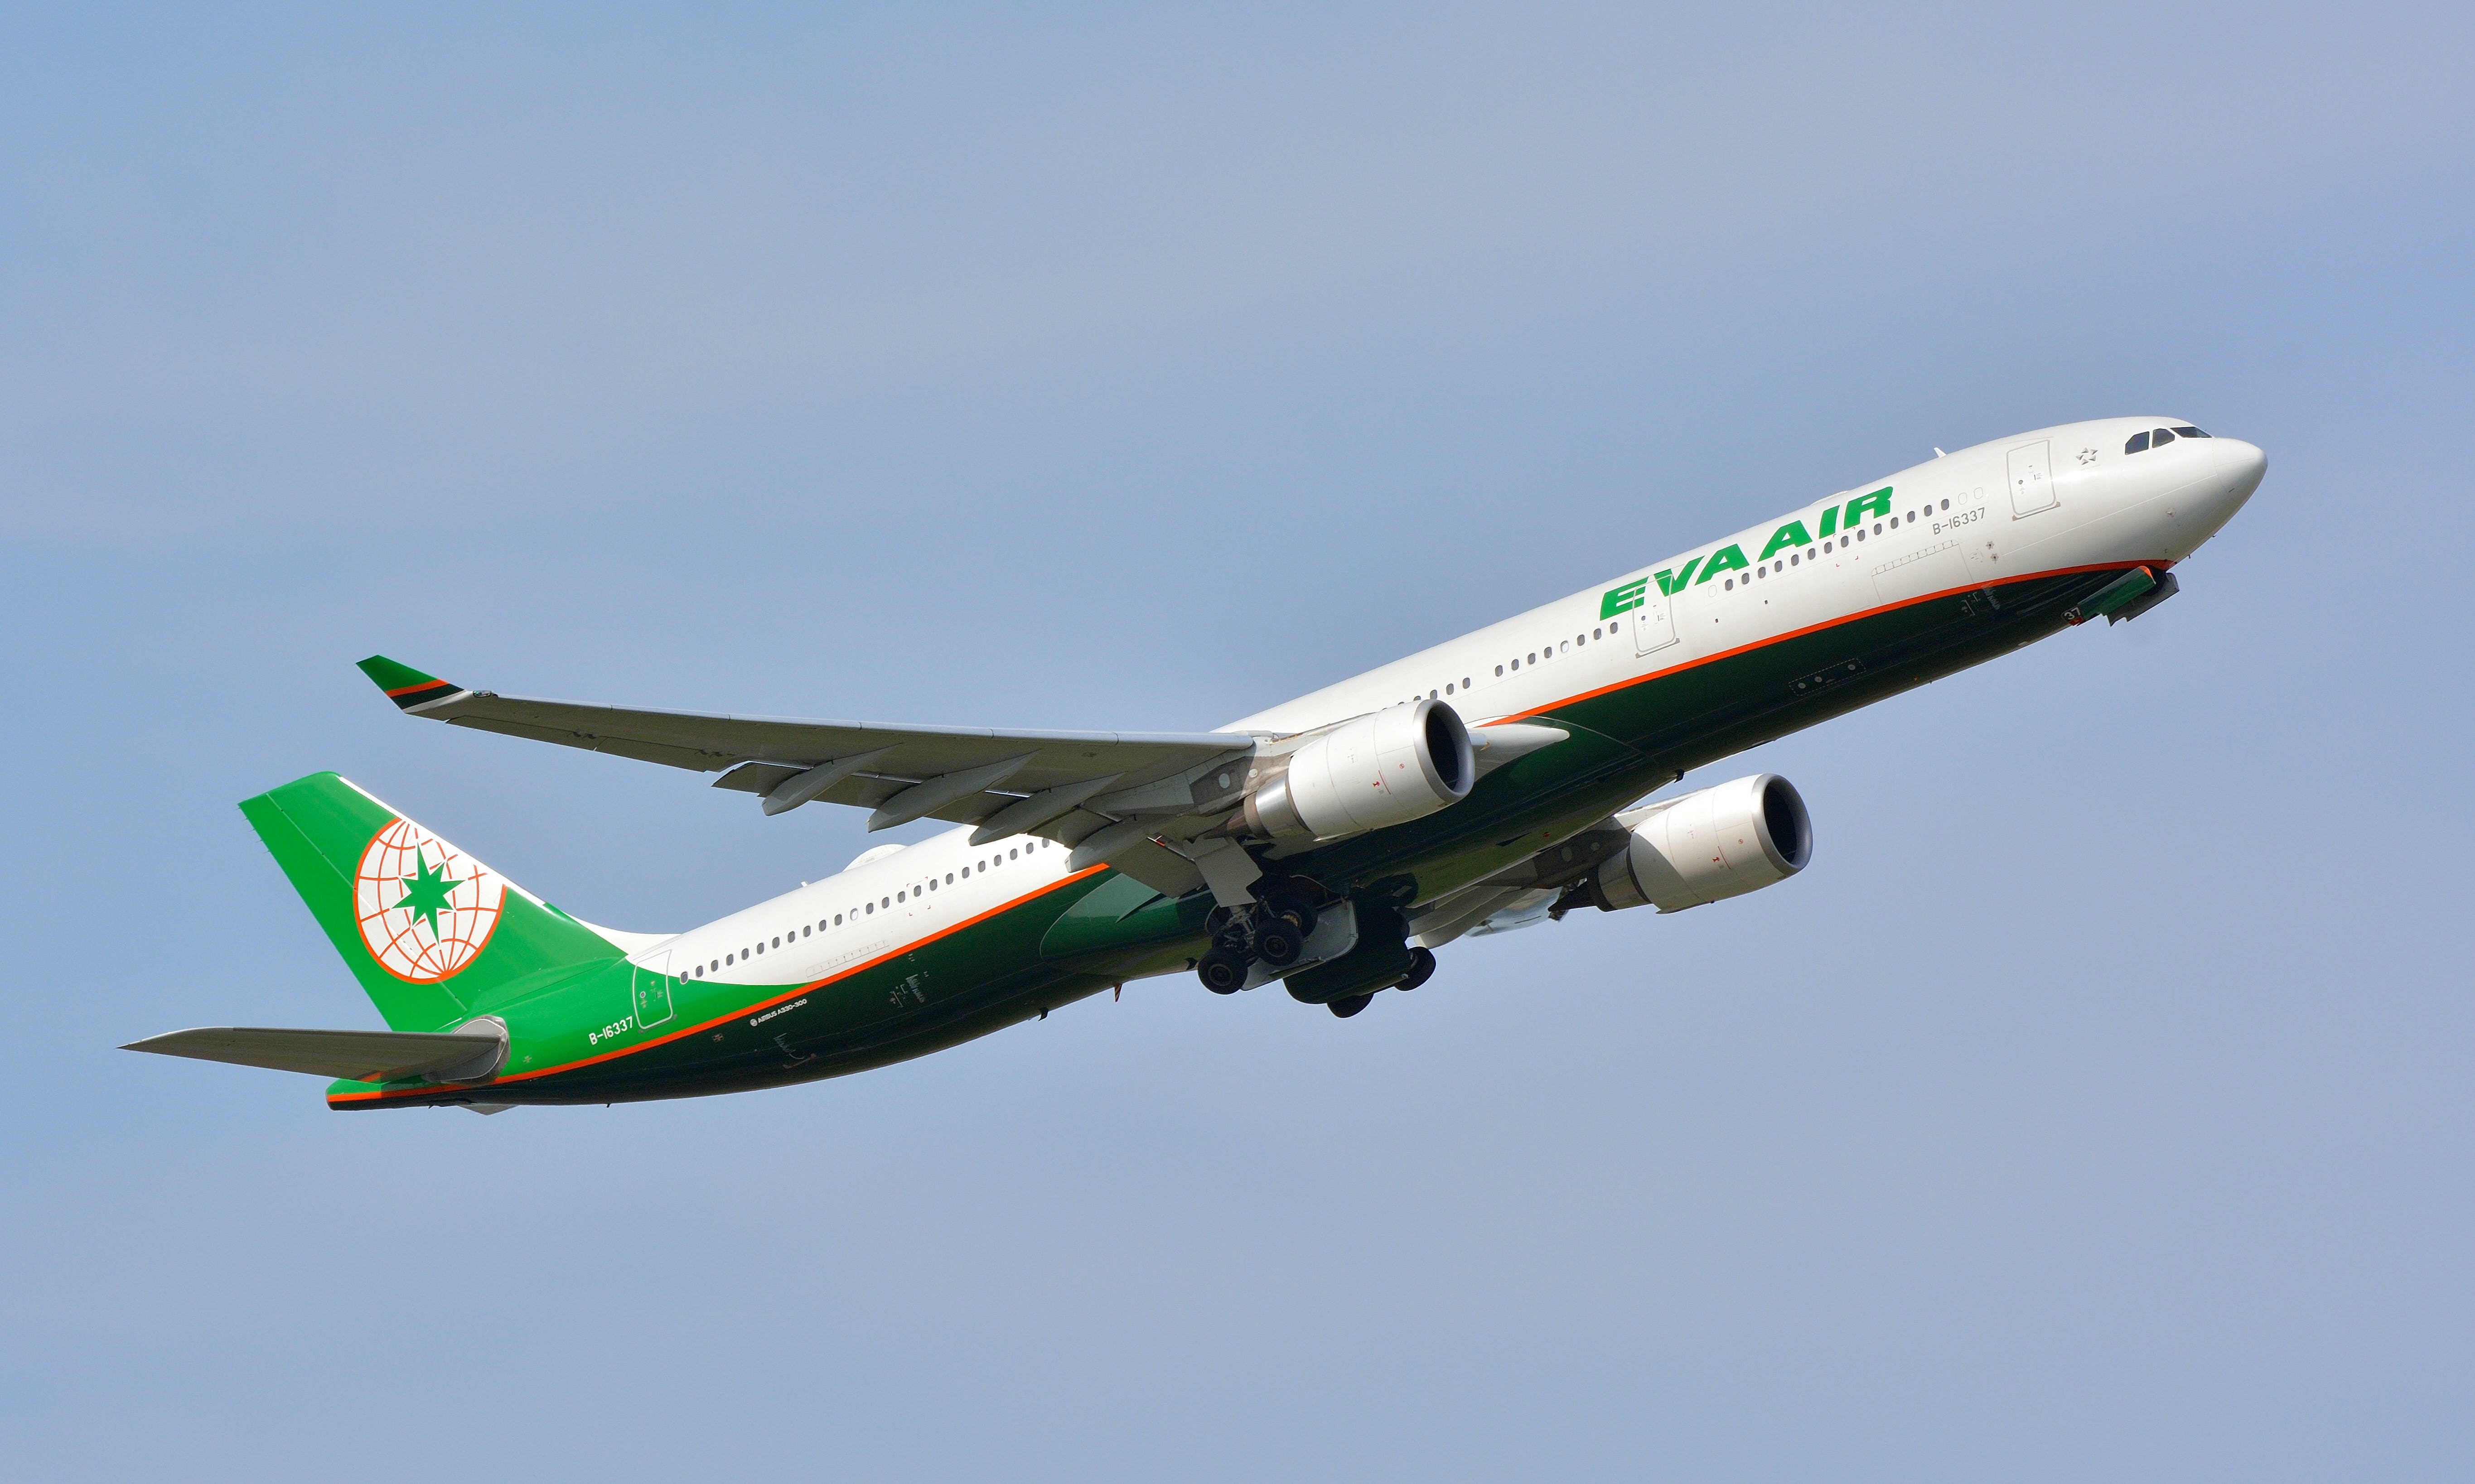 OPINION: EVA Air's Recent Scandals Are Just the Tip of the Iceberg